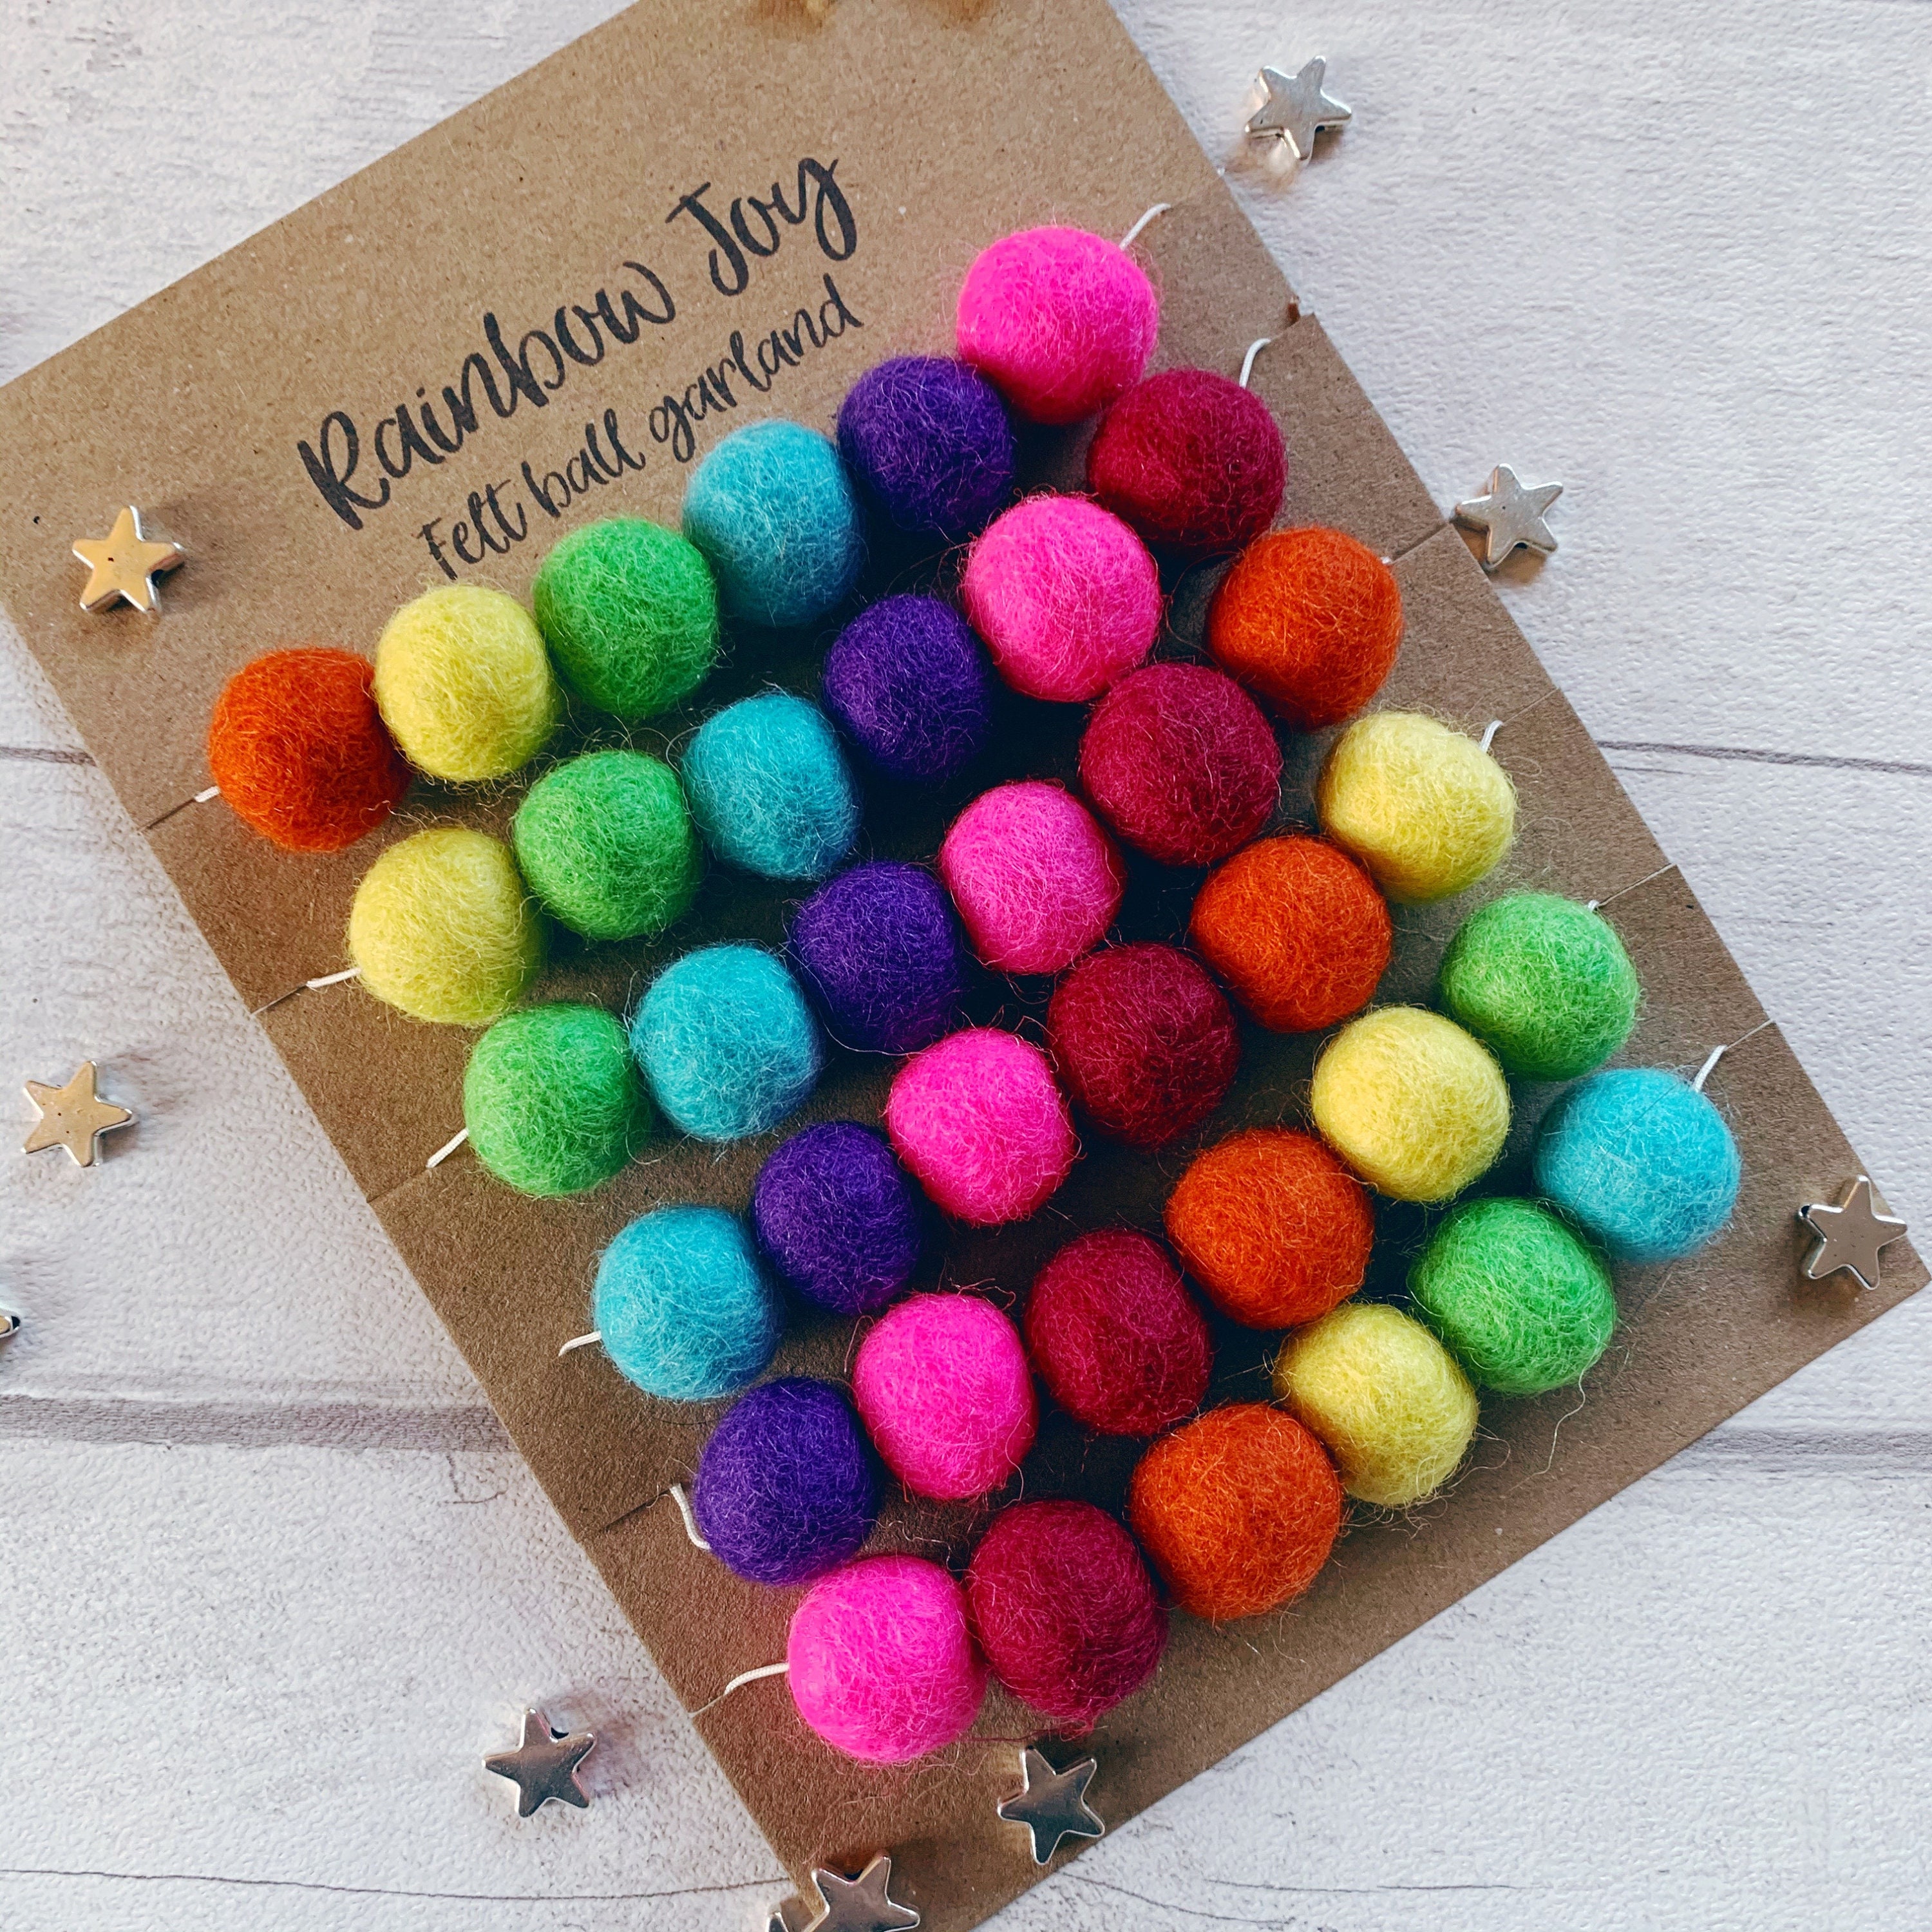 1 Centimeter Glaciart One Felt Pom Poms Bulk Small Puff for Felting and Garland 0.4 Inch 1000 Pieces Wool Balls Red, Blue, Orange, Yellow, Black, Pastel and More Handmade Felted 40 Color 